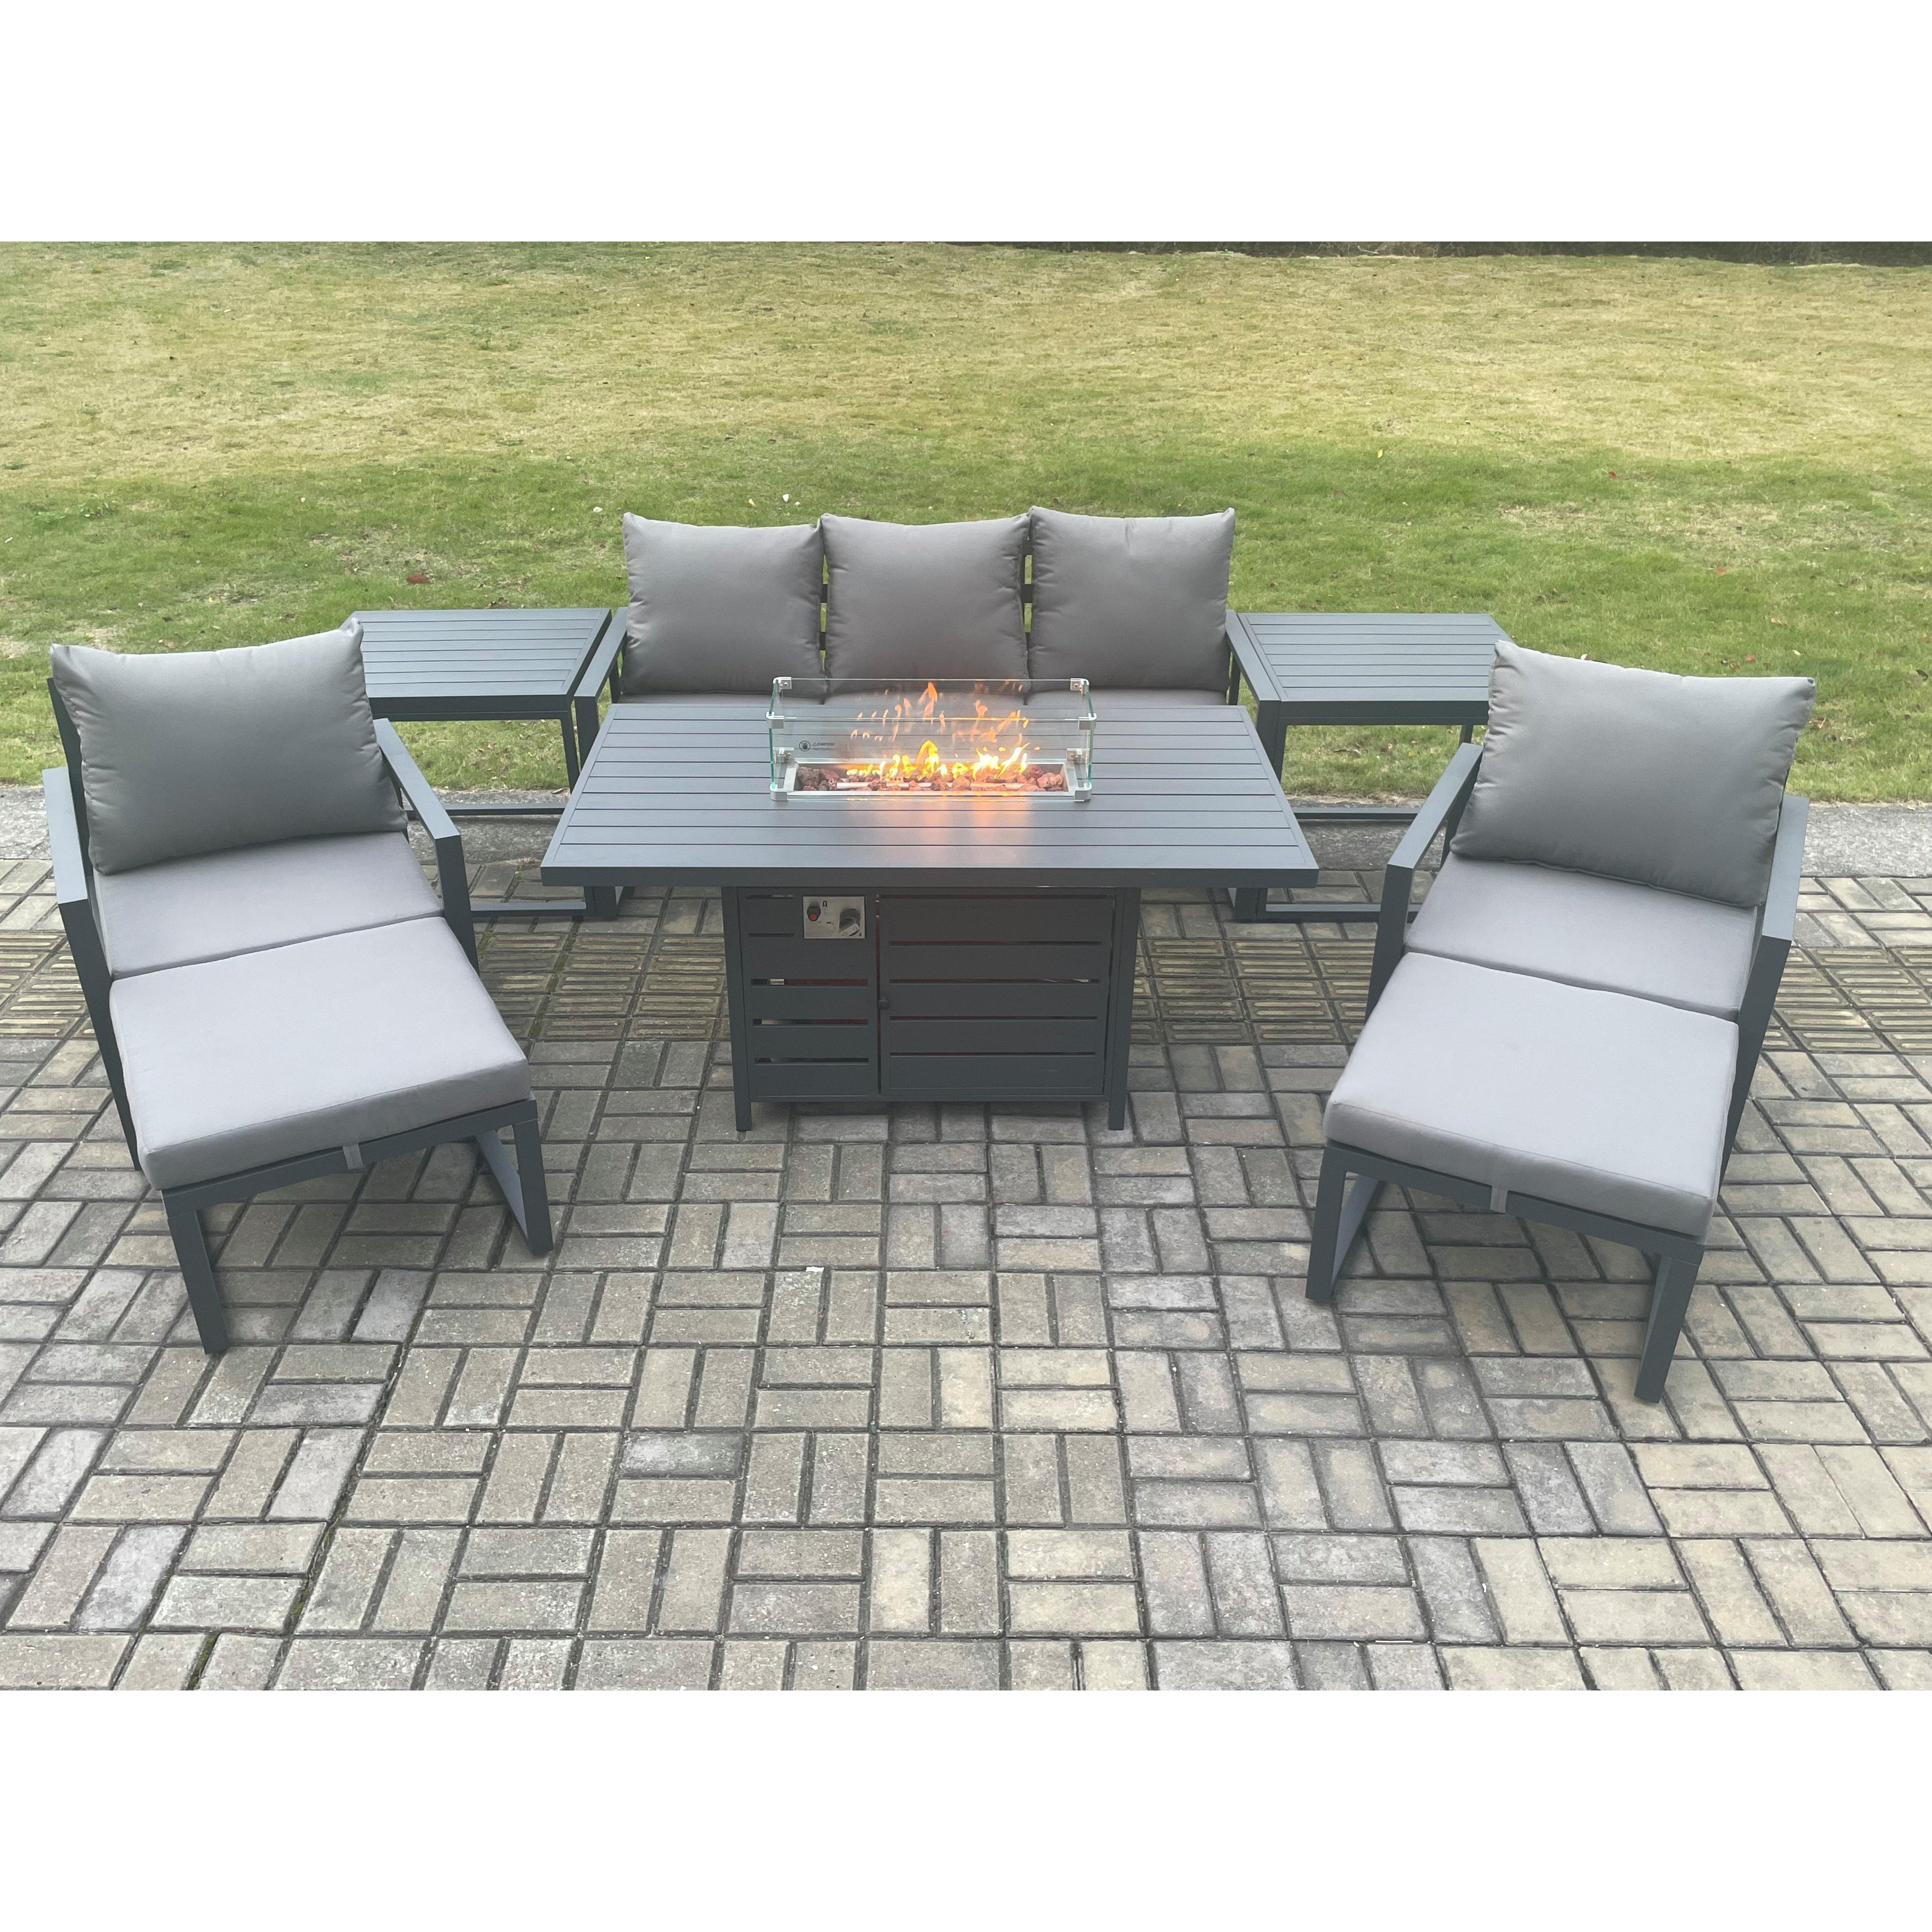 Aluminium Patio Outdoor Garden Furniture Lounge Sofa Set Gas Fire Pit Dining Table with 2 Side Tables 2 Big Footstools Dark Grey - image 1